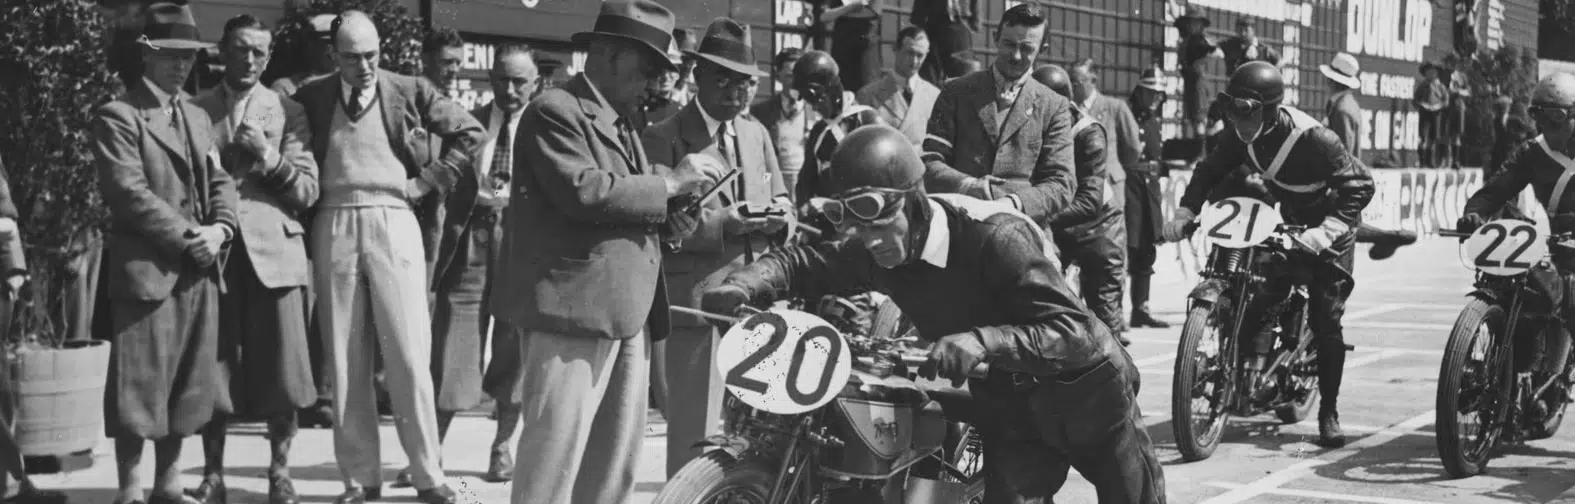 Men on motorbikes about to race